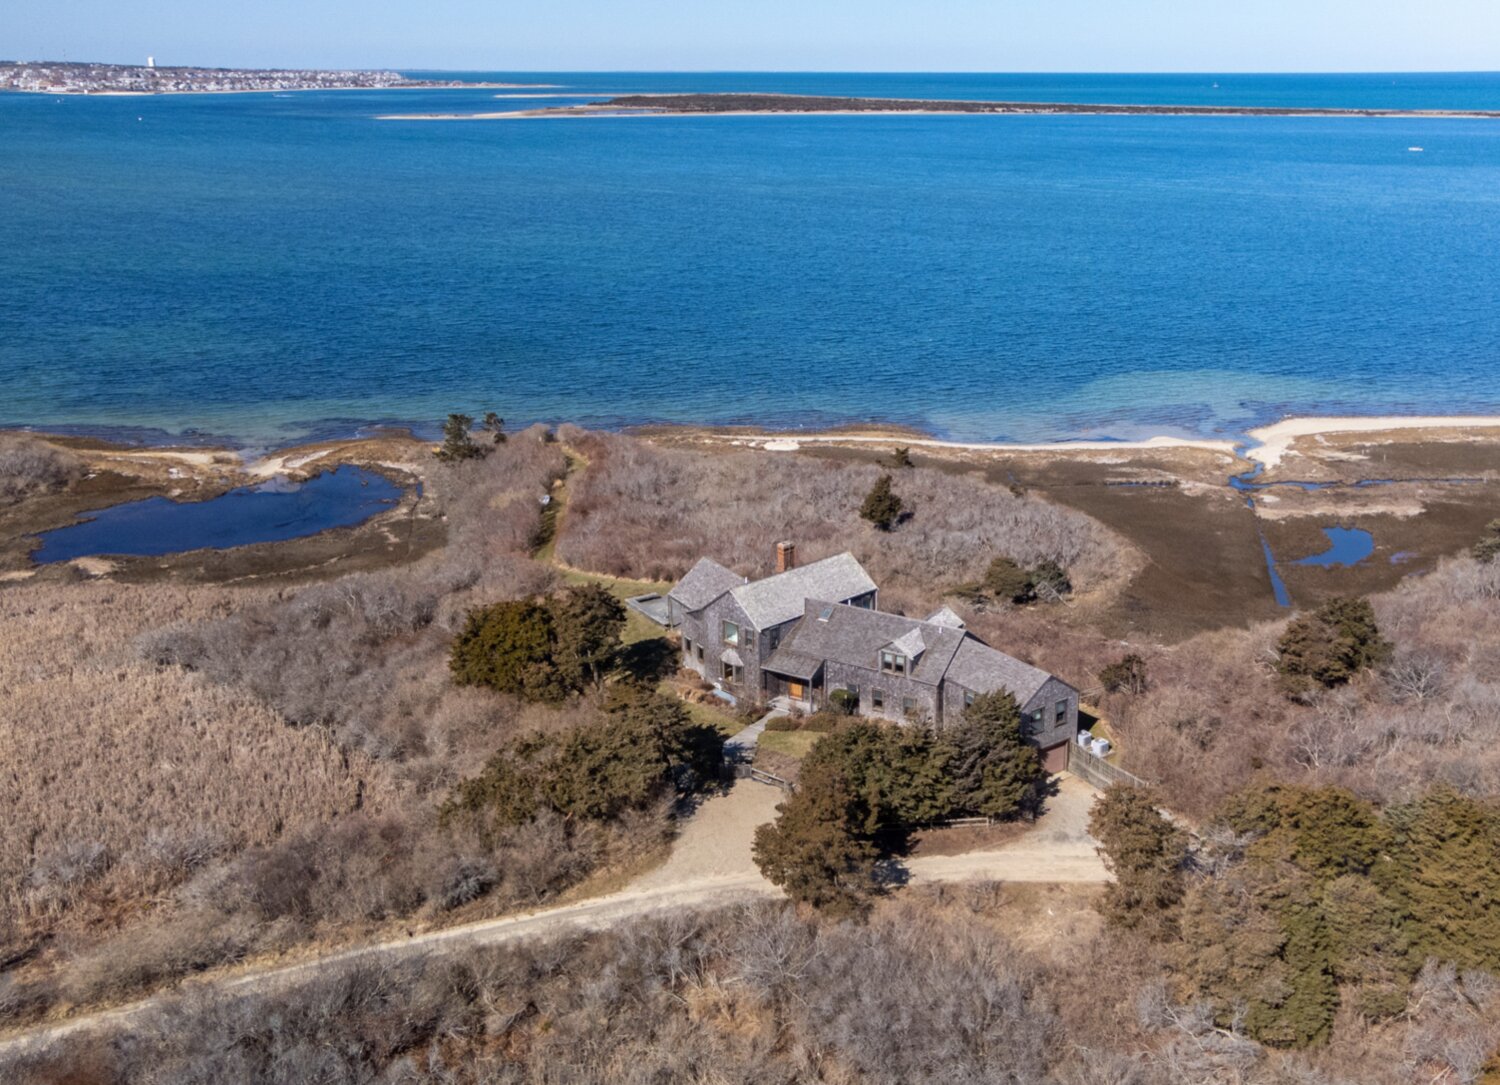 This four-bedroom, five-bathroom home is located on 6.8 acres of land in Shawkemo with sweeping, unobstructed views of the island and the skyline of historic downtown.